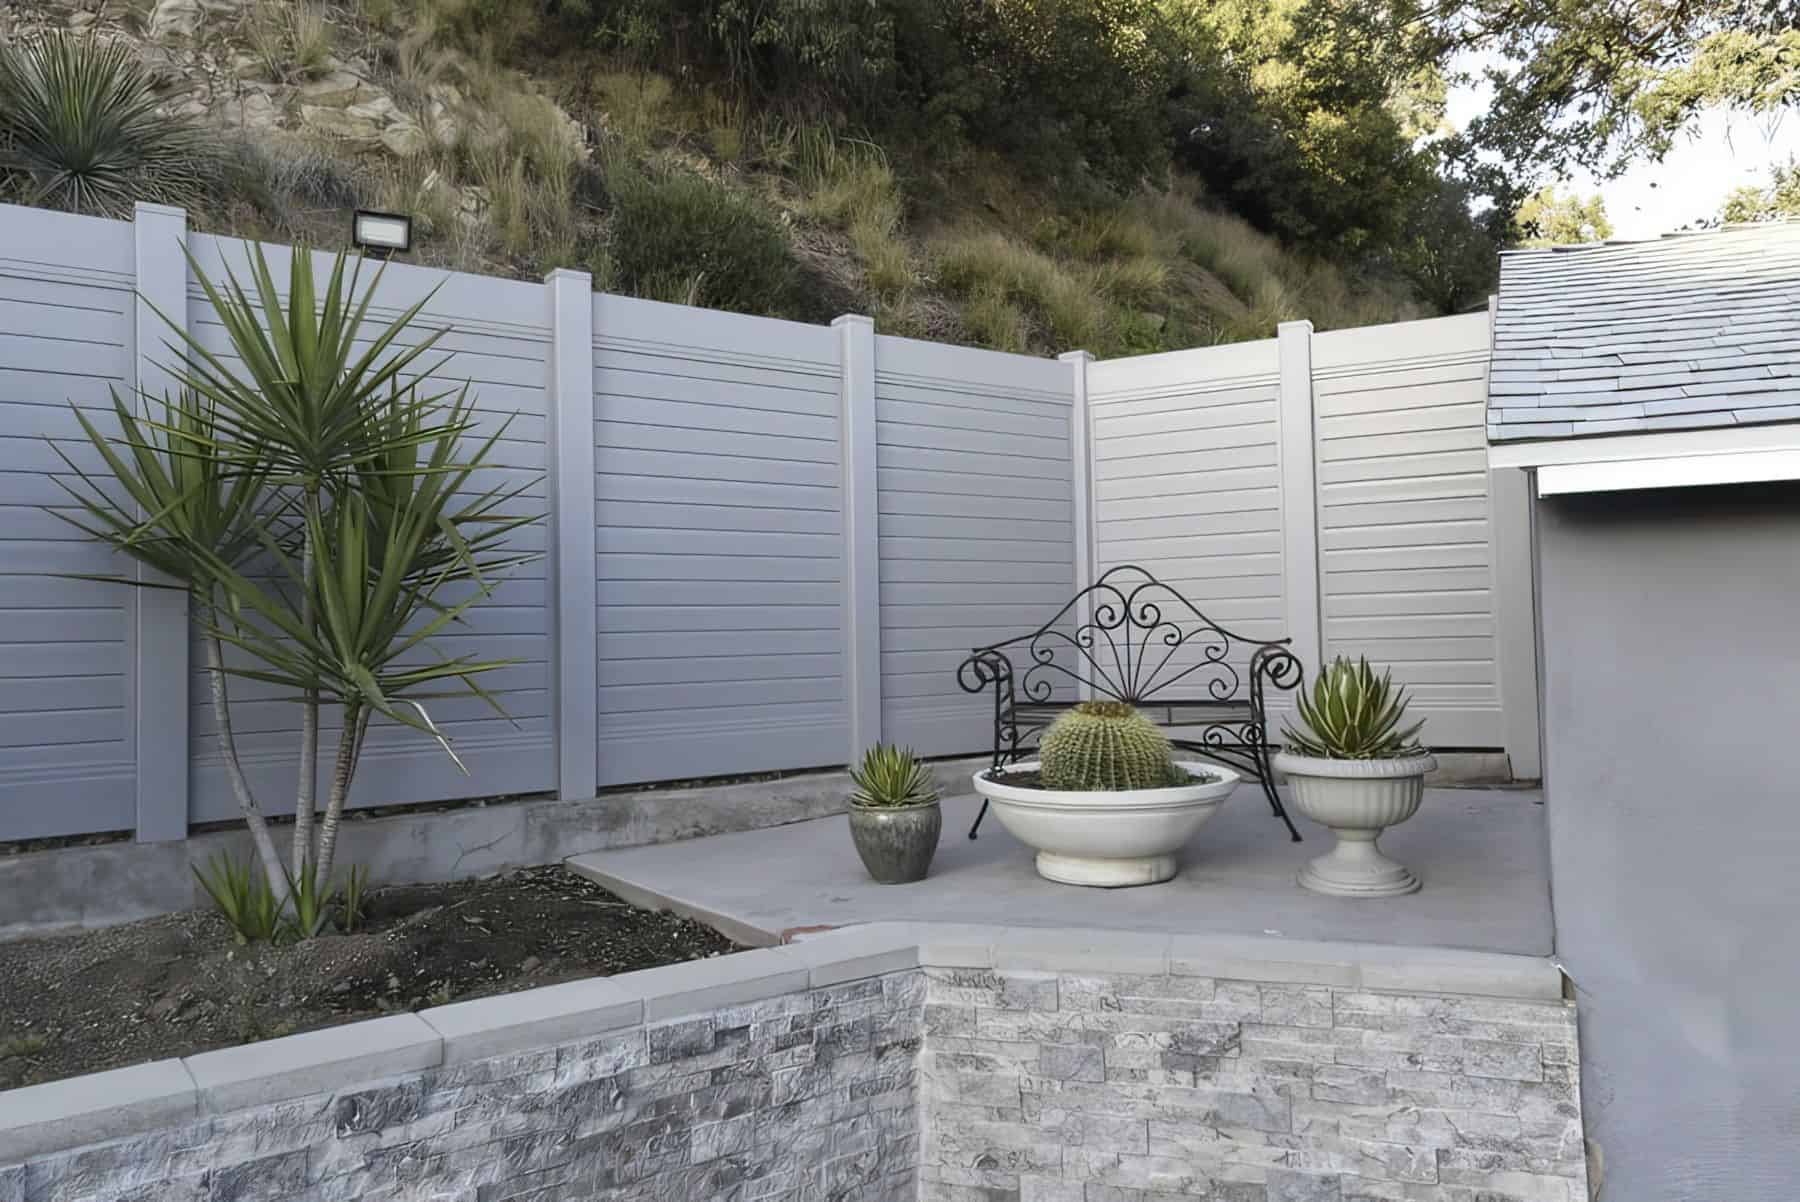 White vinyl fence creating boundary for backyard with decorative seating area and lush plants and small trees.